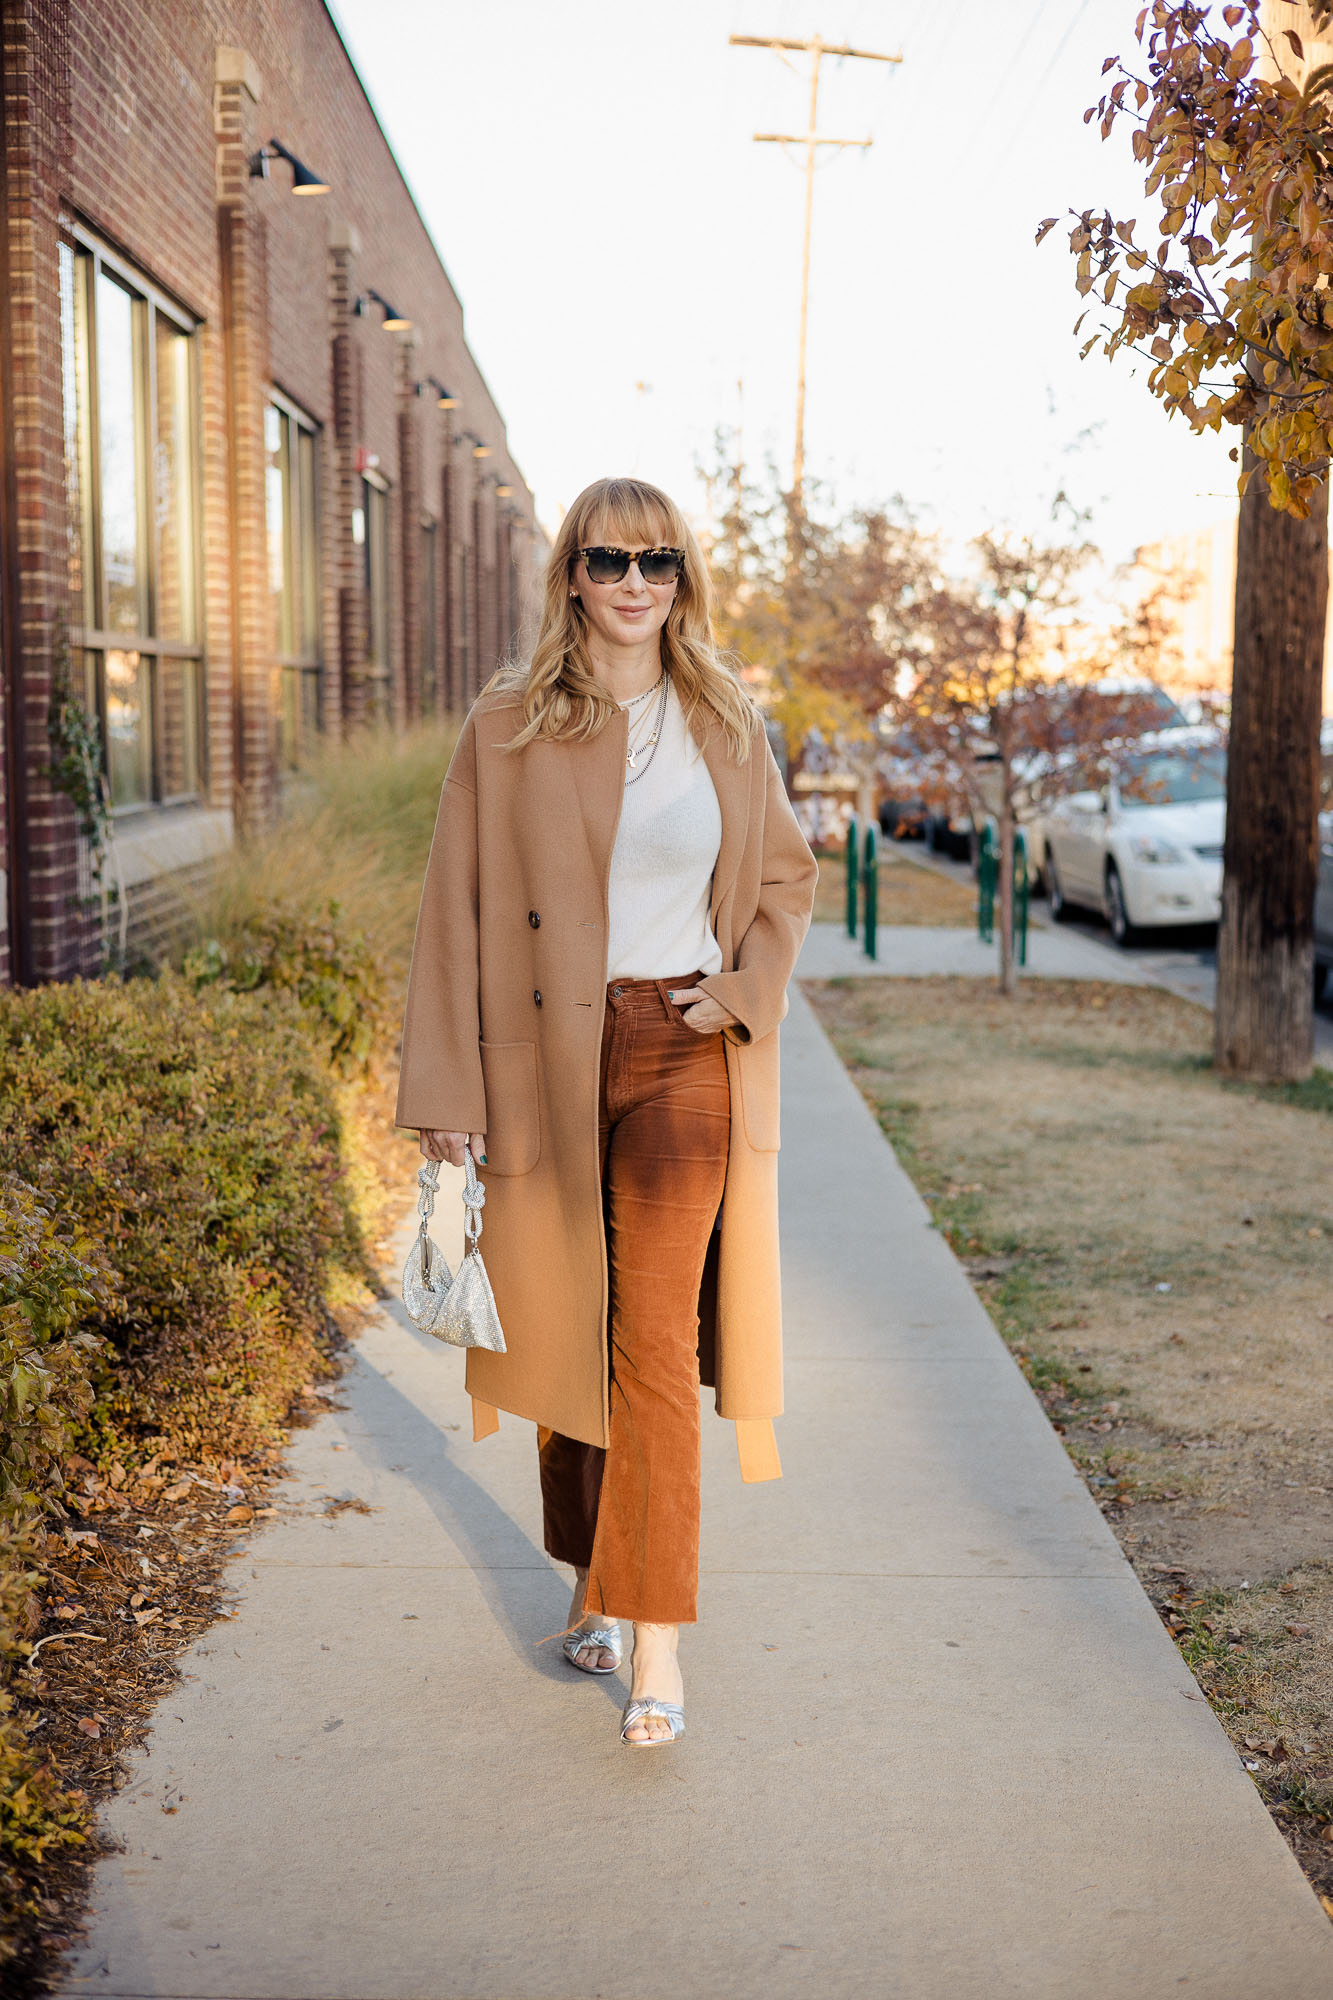 Wearing Anine Bing Dylan camel coat with brown Mother corduroy pants and silver accessories.